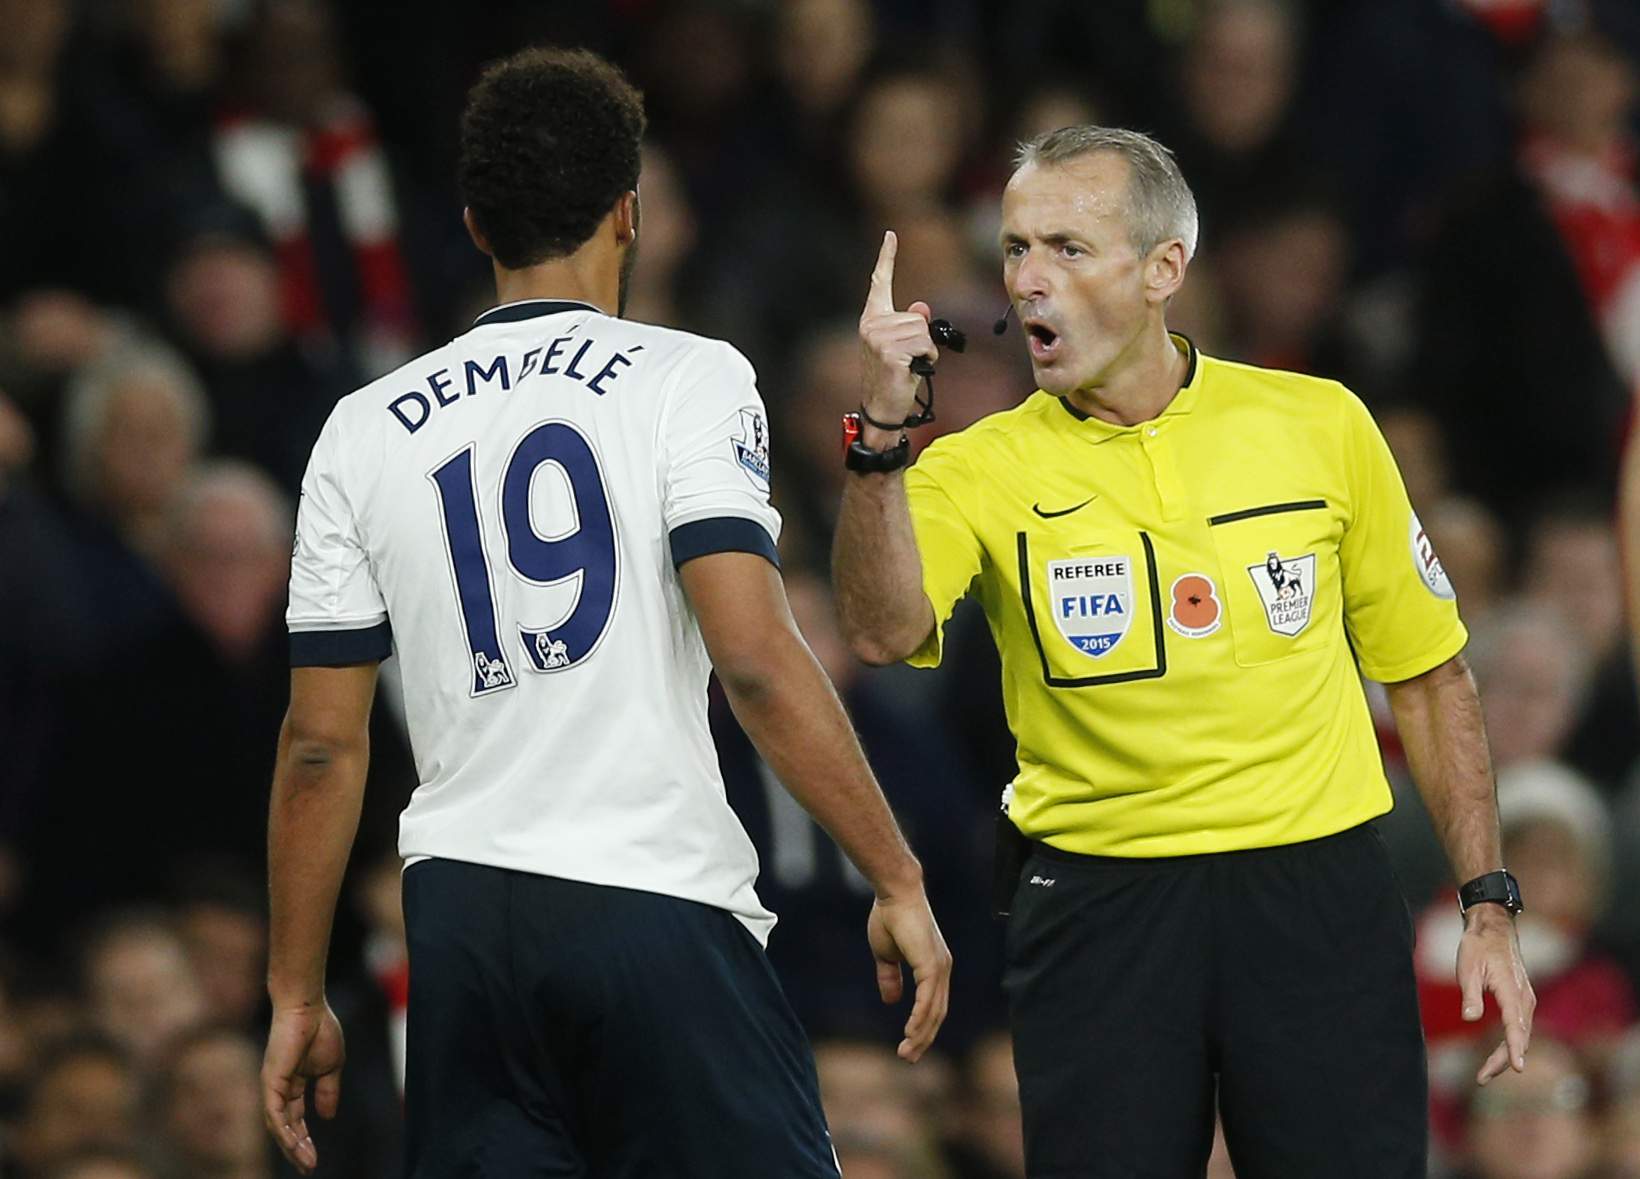 Football - Arsenal v Tottenham Hotspur - Barclays Premier League - Emirates Stadium - 8/11/15 Referee Martin Atkinson gestures to Tottenham's Mousa Dembele Action Images via Reuters / Andrew Couldridge Livepic EDITORIAL USE ONLY. No use with unauthorized audio, video, data, fixture lists, club/league logos or "live" services. Online in-match use limited to 45 images, no video emulation. No use in betting, games or single club/league/player publications.  Please contact your account representative for further details.